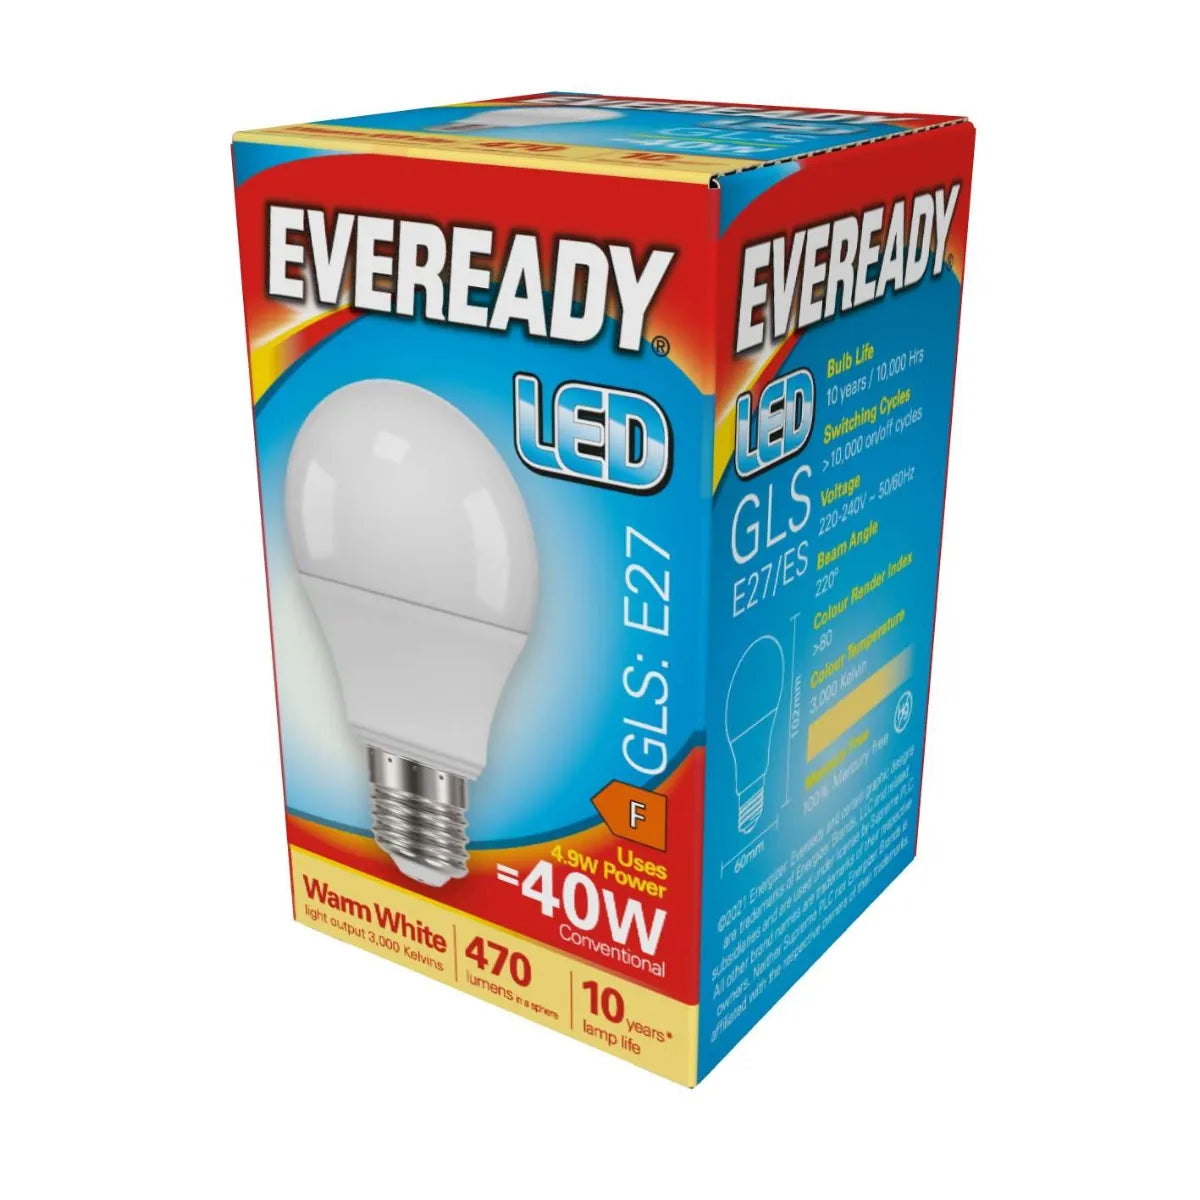 Eveready LED GLS E27 (ES) 470lm 4.9W 3,000K, Warm White (40W Replacement)